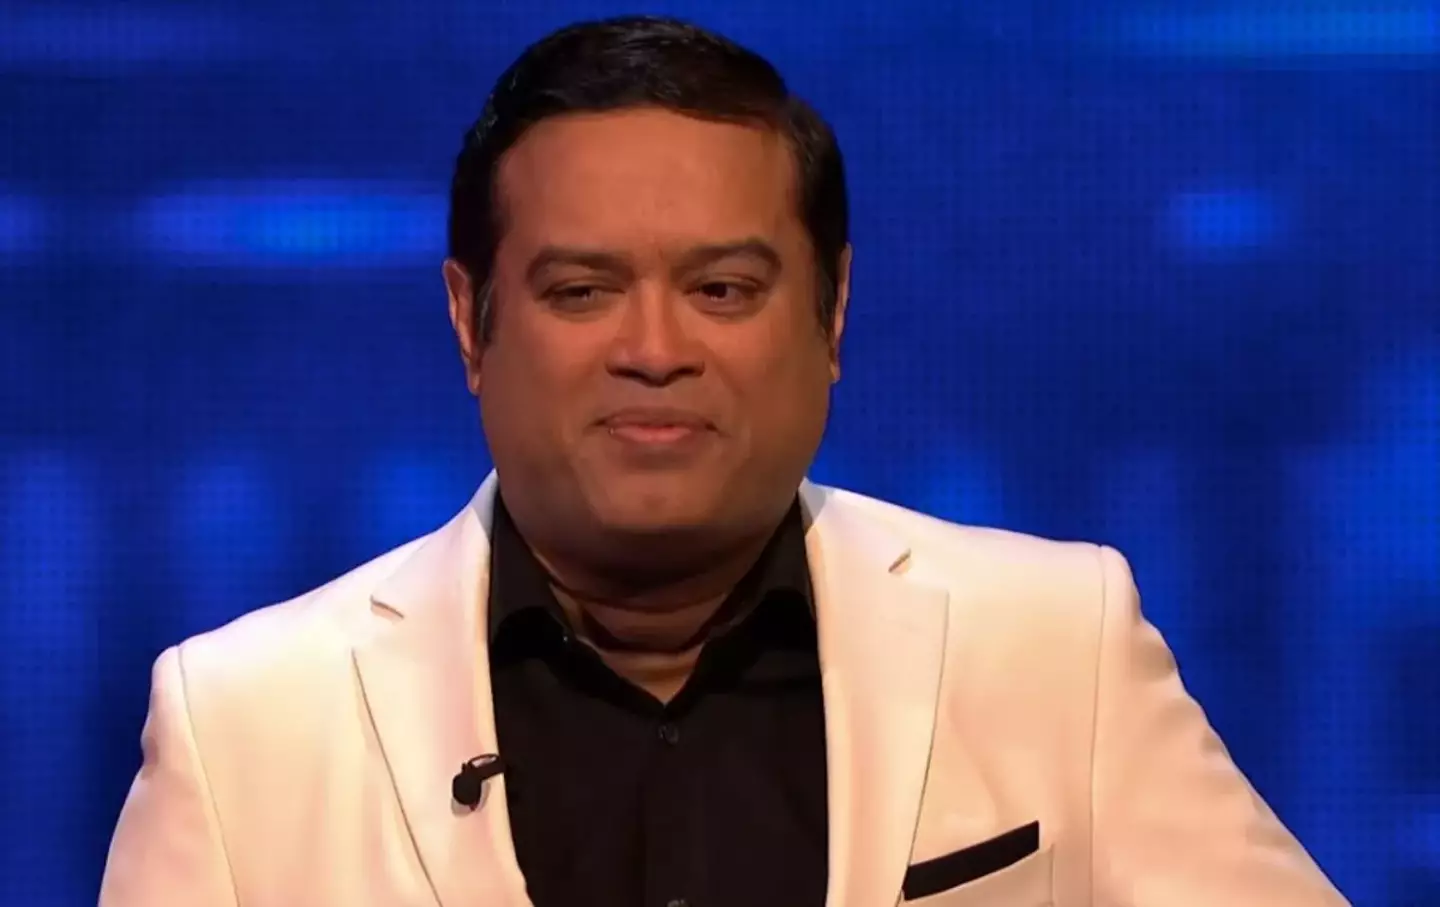 Paul Sinha offered his words of condolence after Green's death.